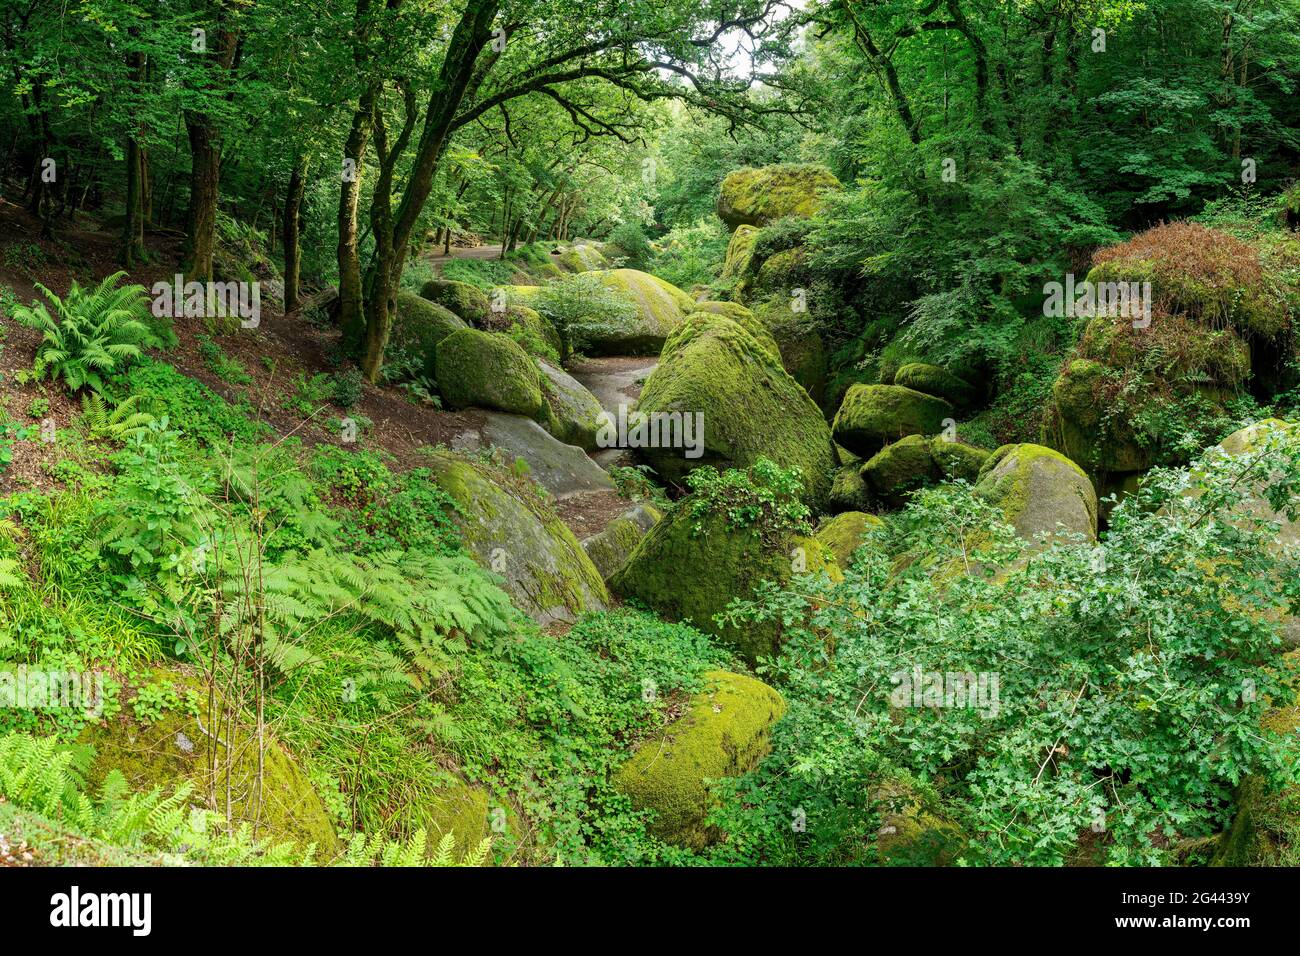 Landscape with moss-covered boulders, Huelgoat, Bretagne, France Stock Photo